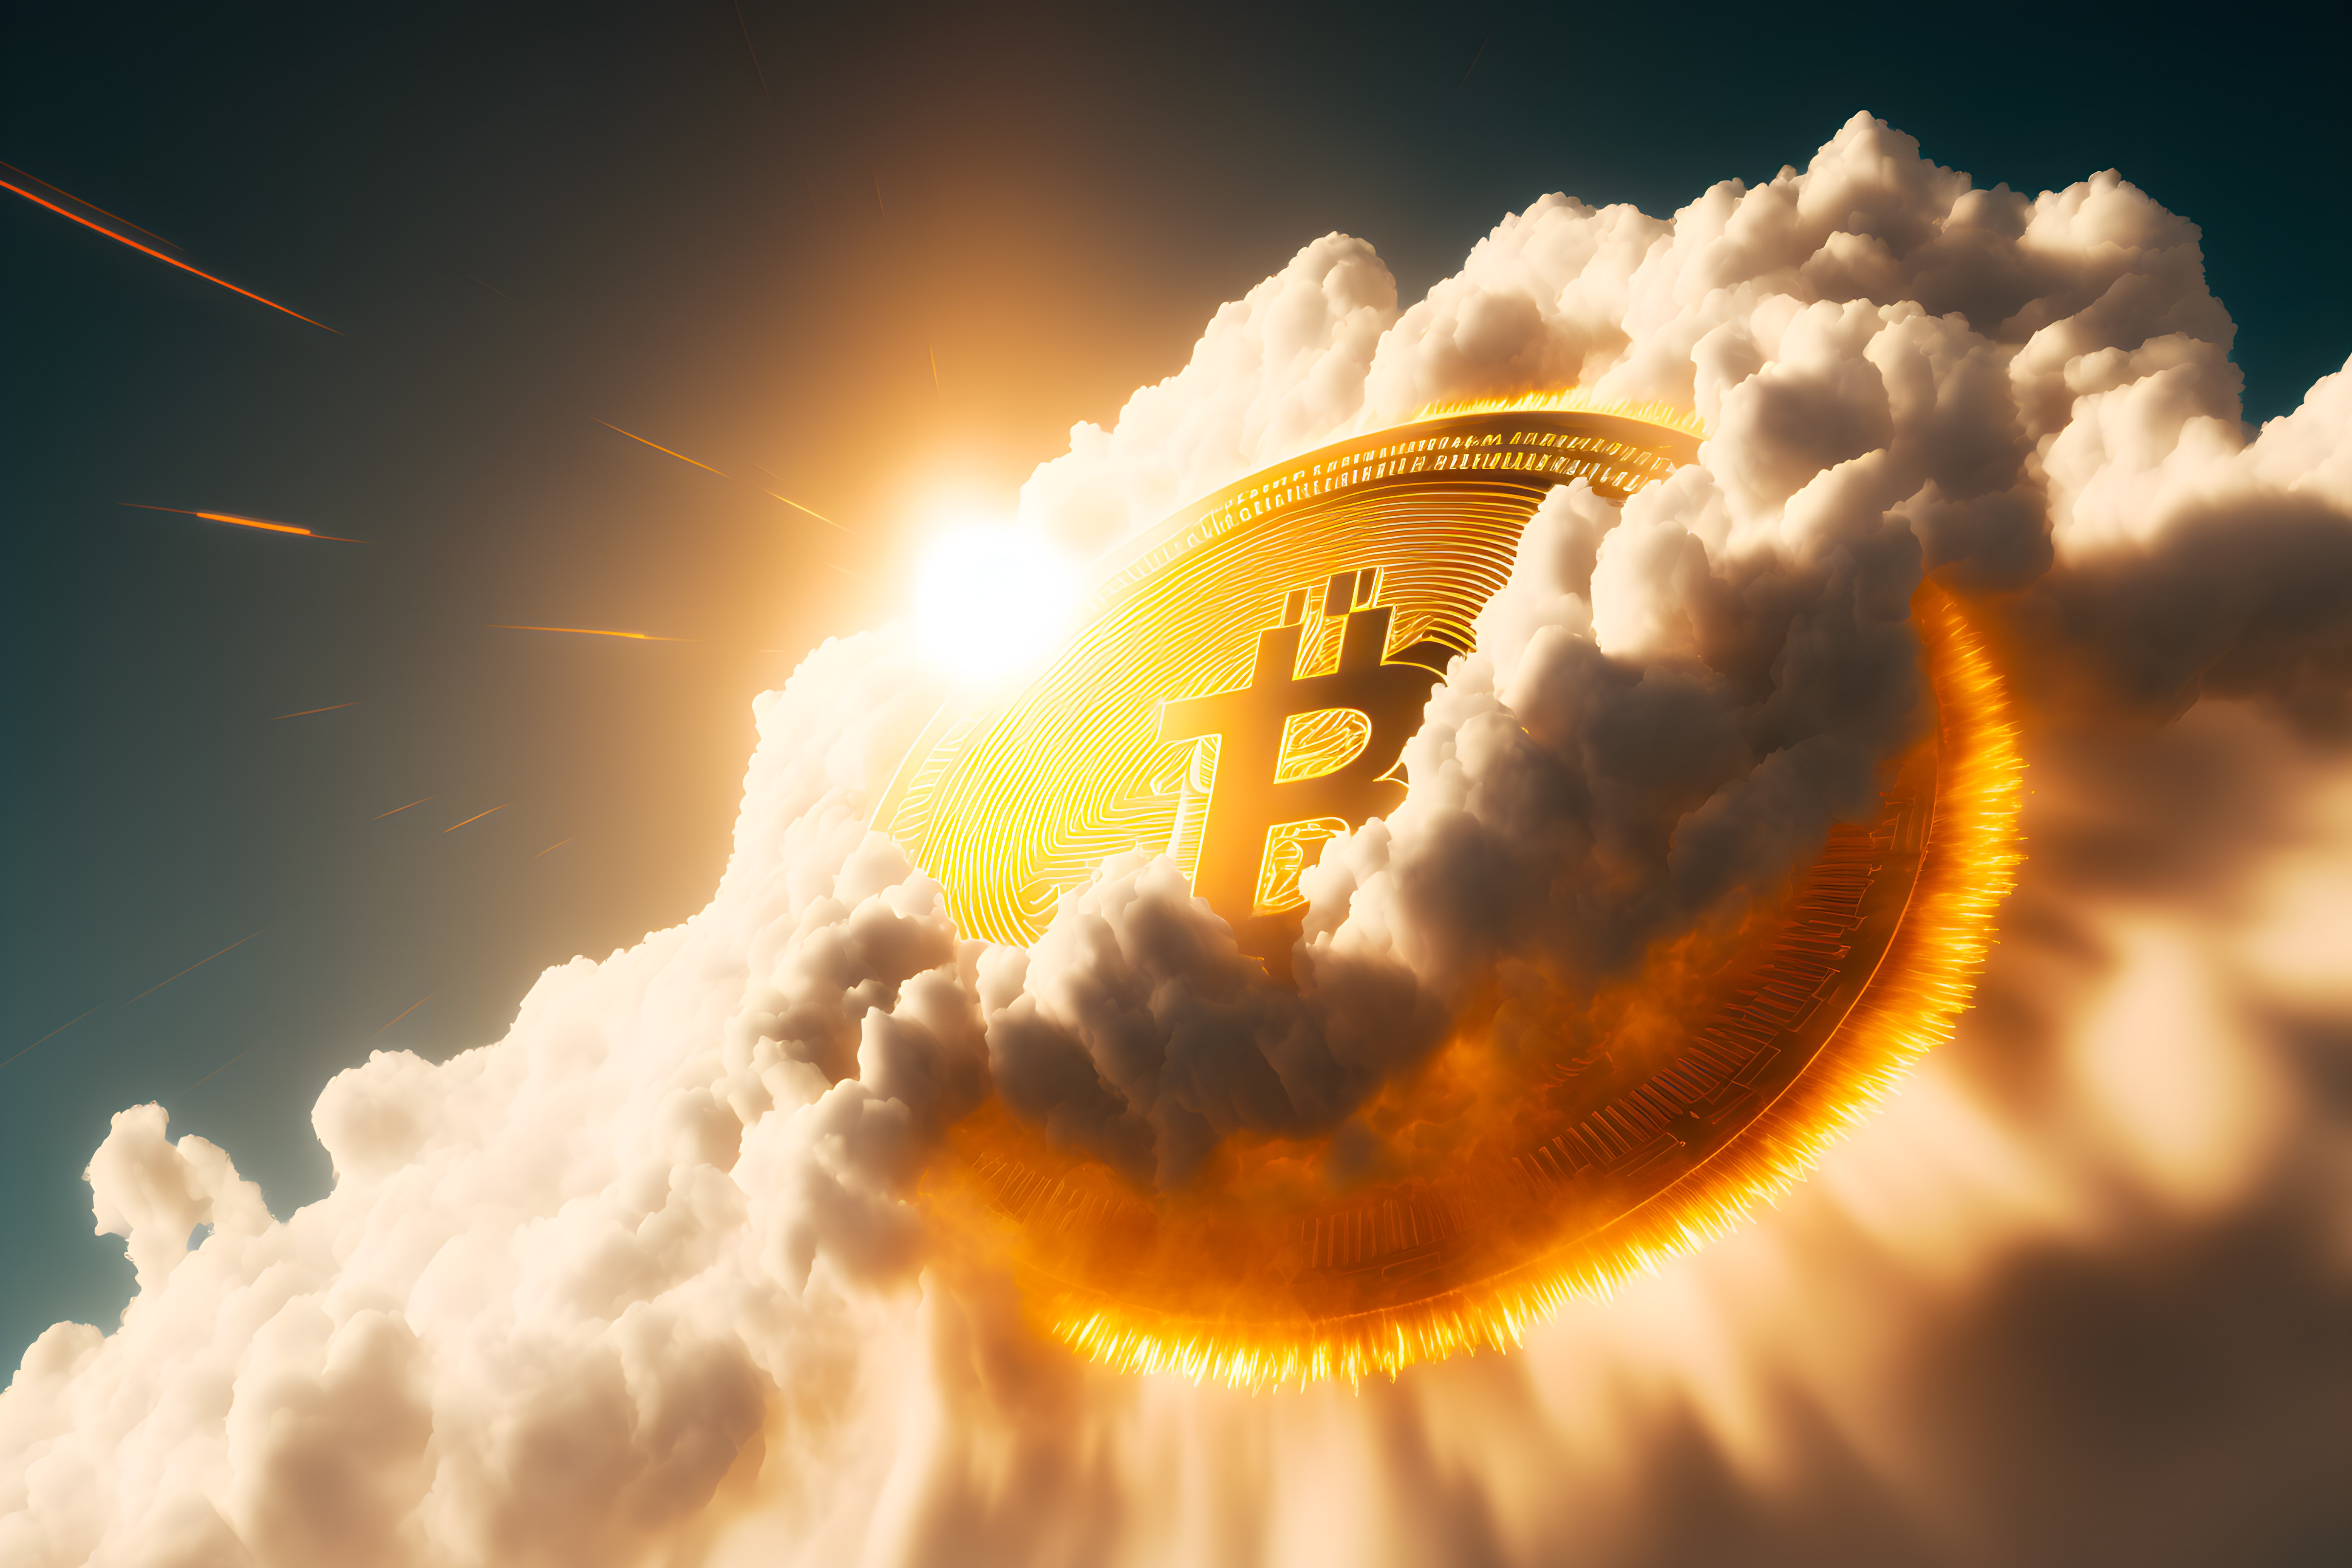 Bitcoin Begins Bull Market? These Eight Key Indicators All Just Turned Green for the First Time Since Early 2021 thumbnail